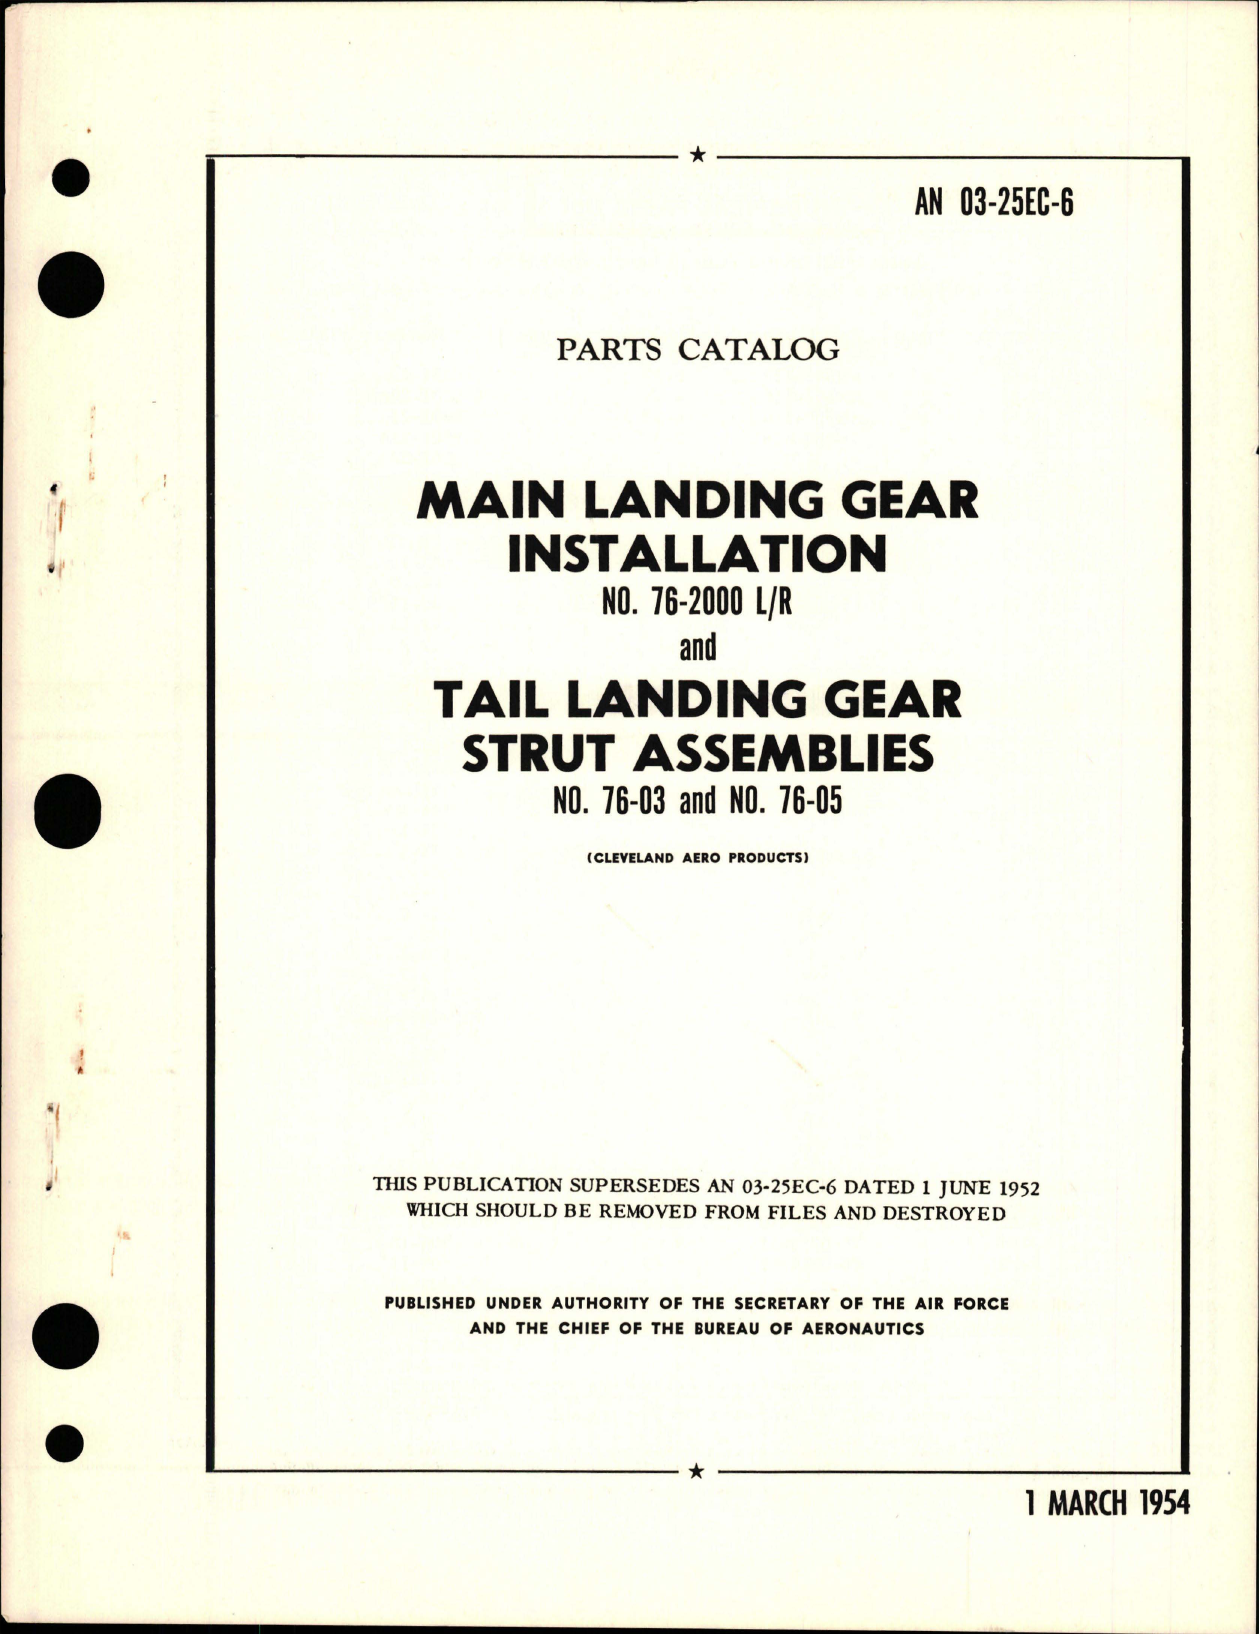 Sample page 1 from AirCorps Library document: Parts Catalog for Main Landing Gear Installation and Tail Landing Gear Strut Assembly